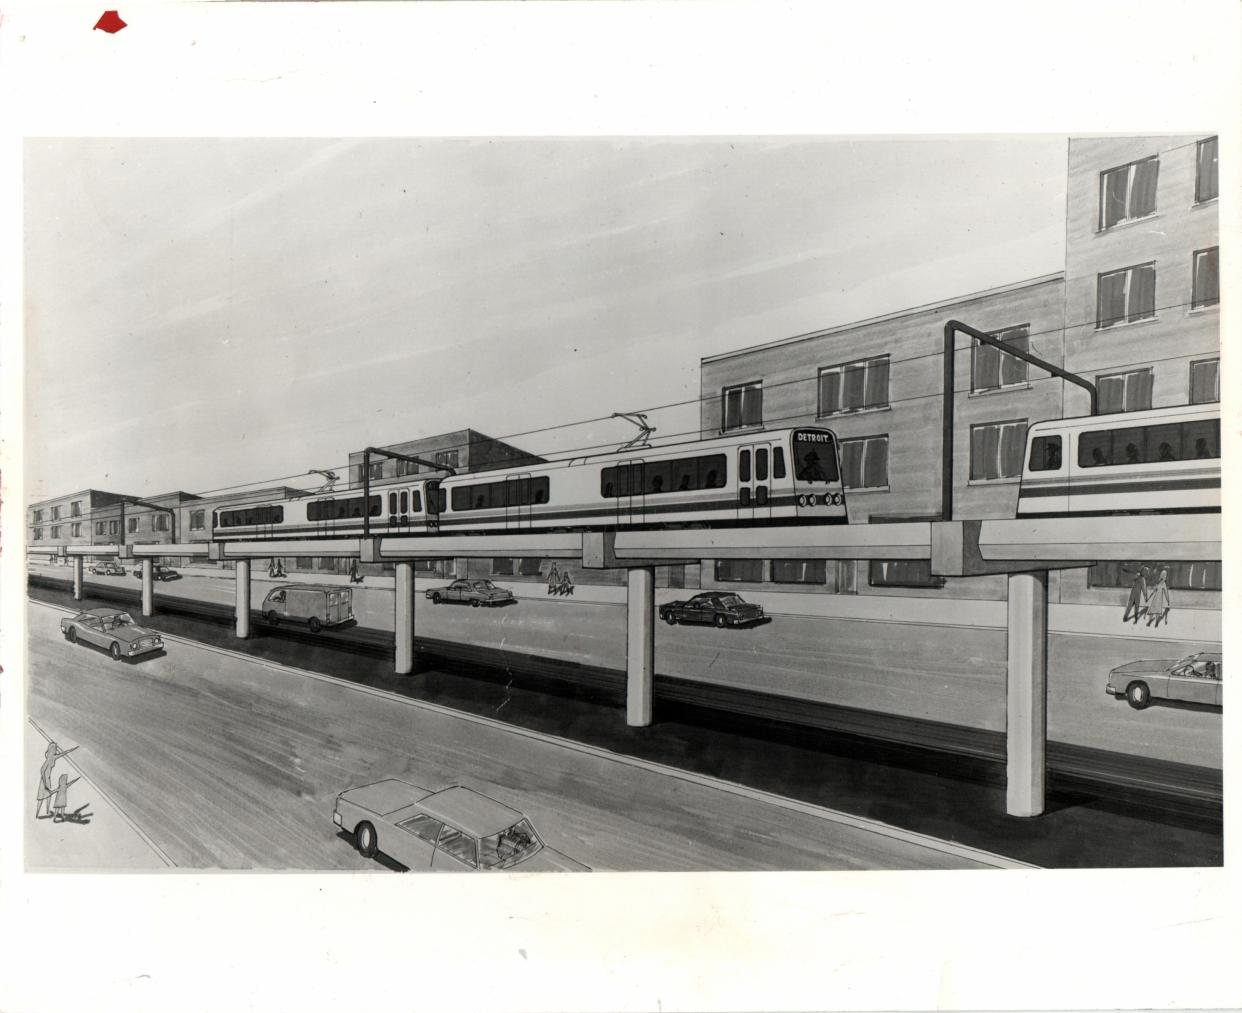 A 1979 drawing of a planned Detroit transit system featuring some elevated trains.